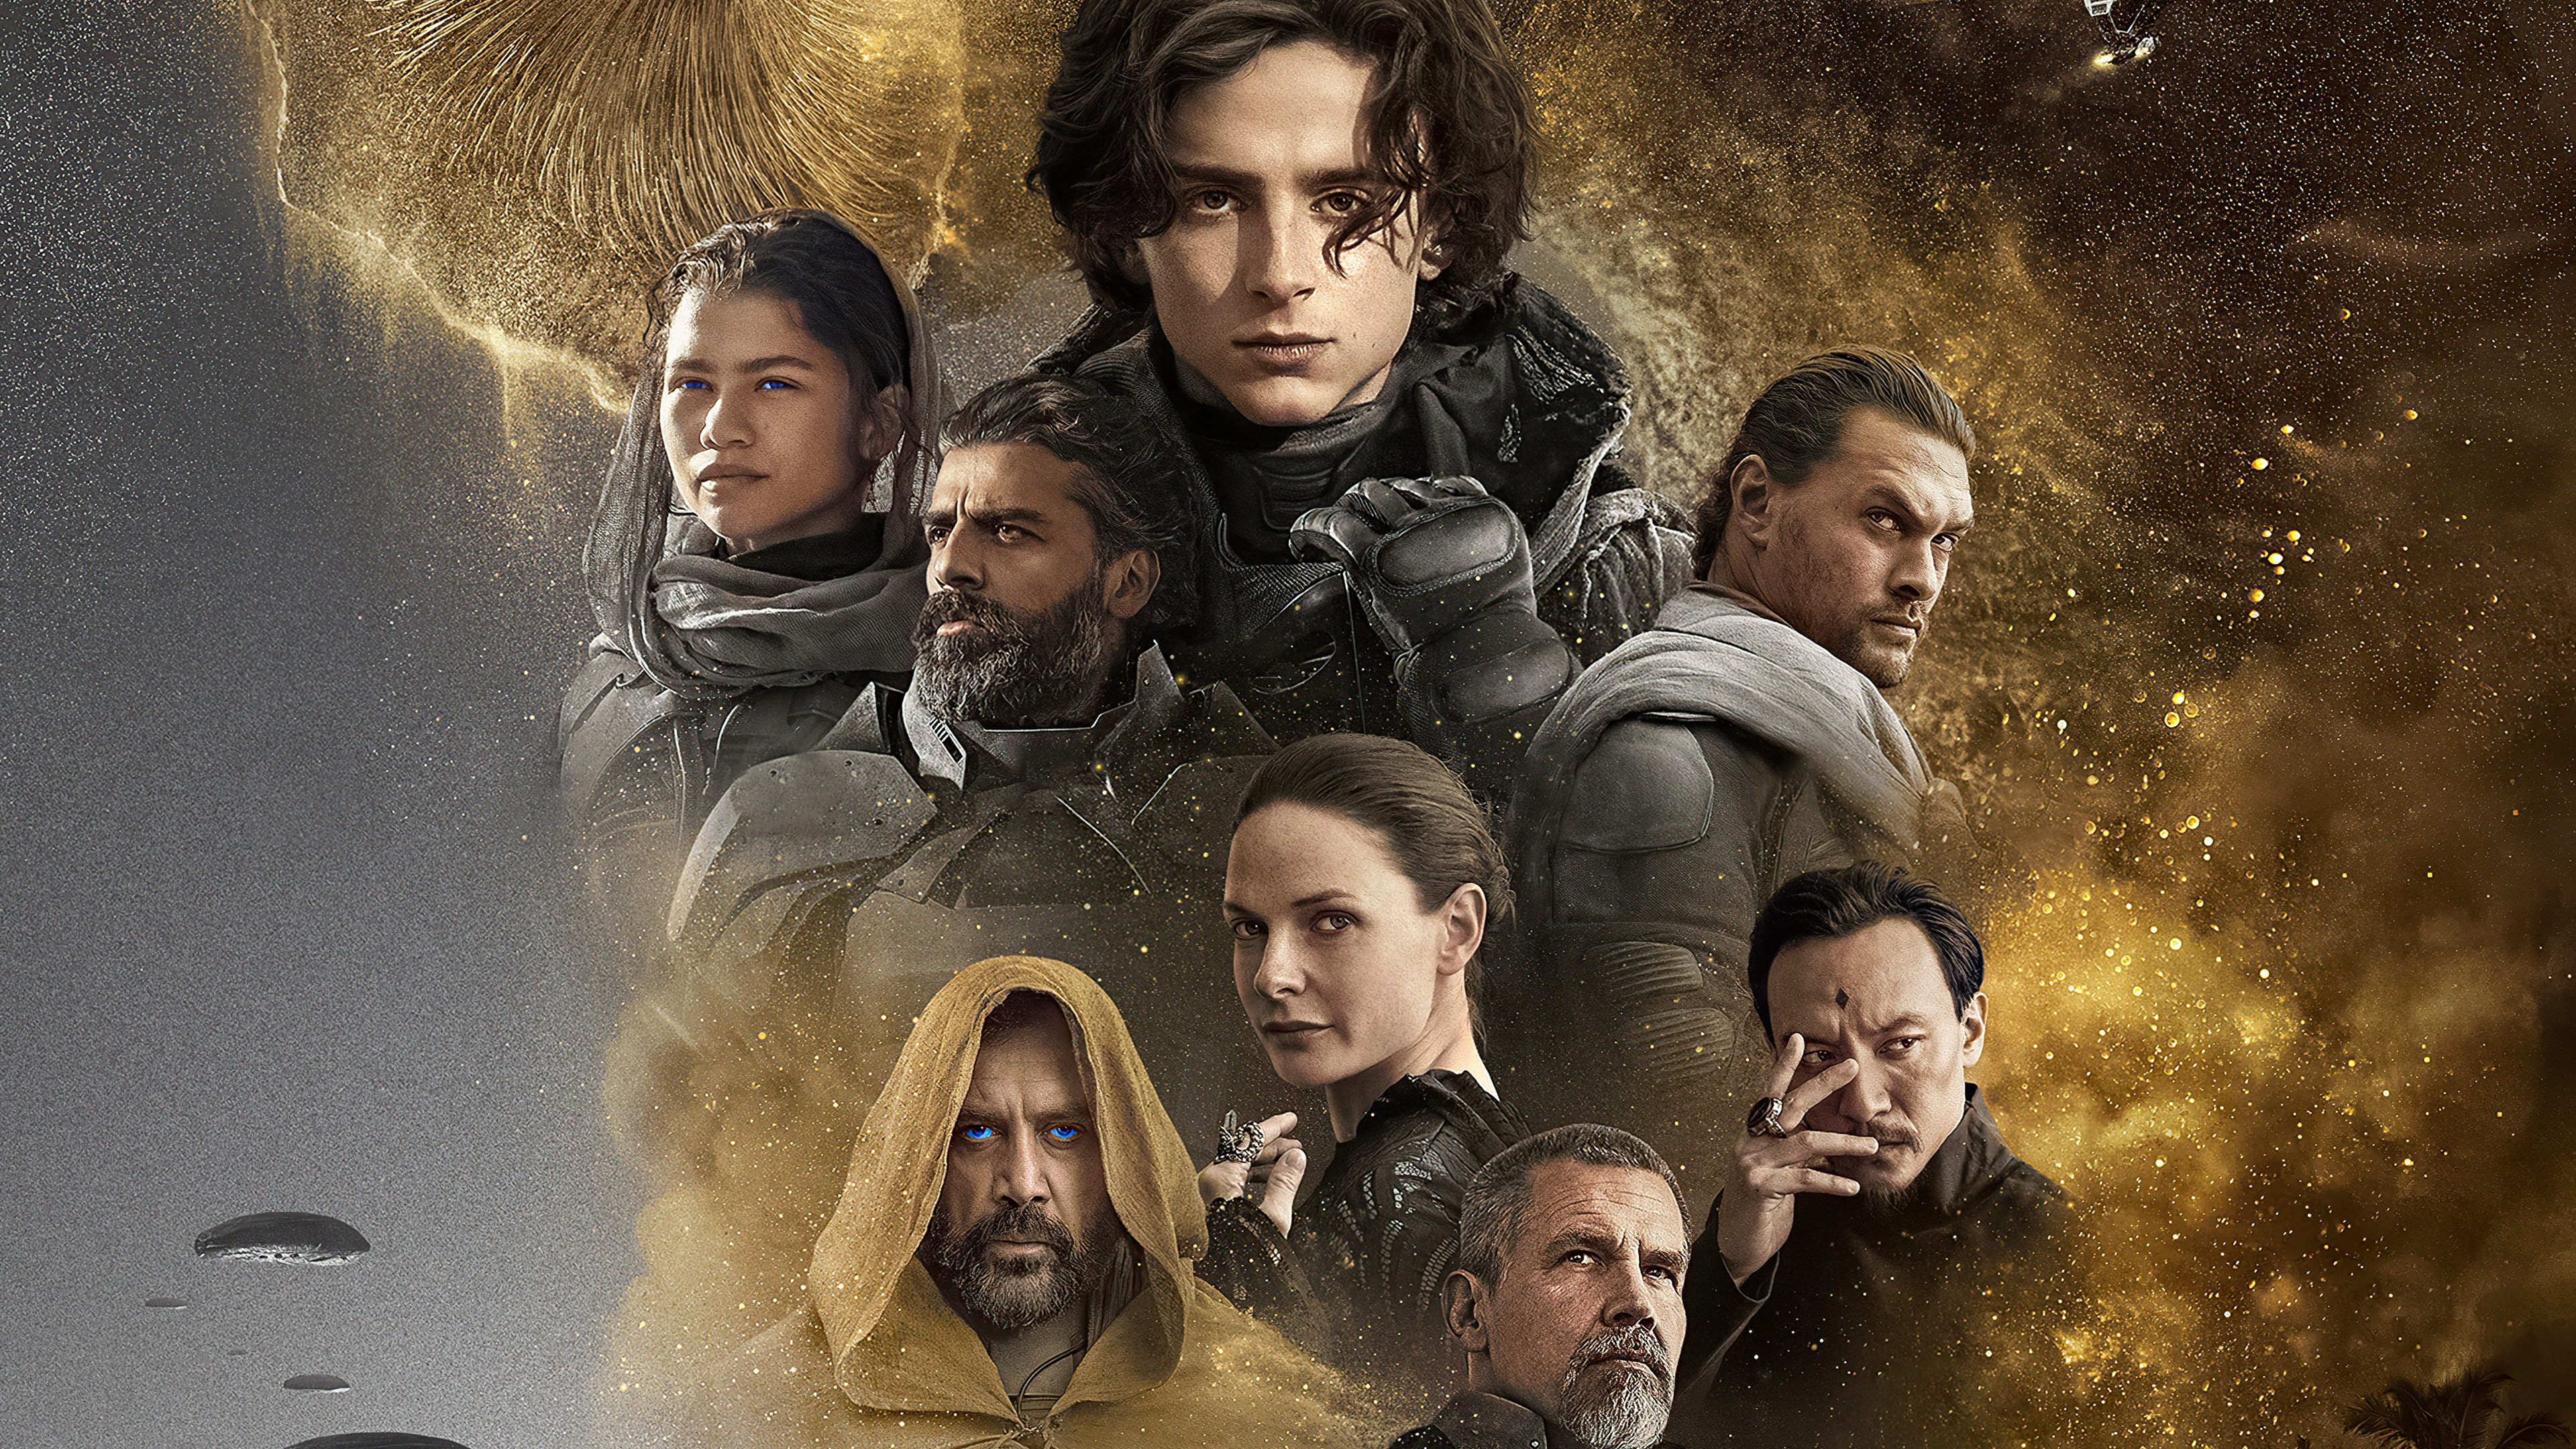 New Hd Poster Of Dune Movie Wallpapers